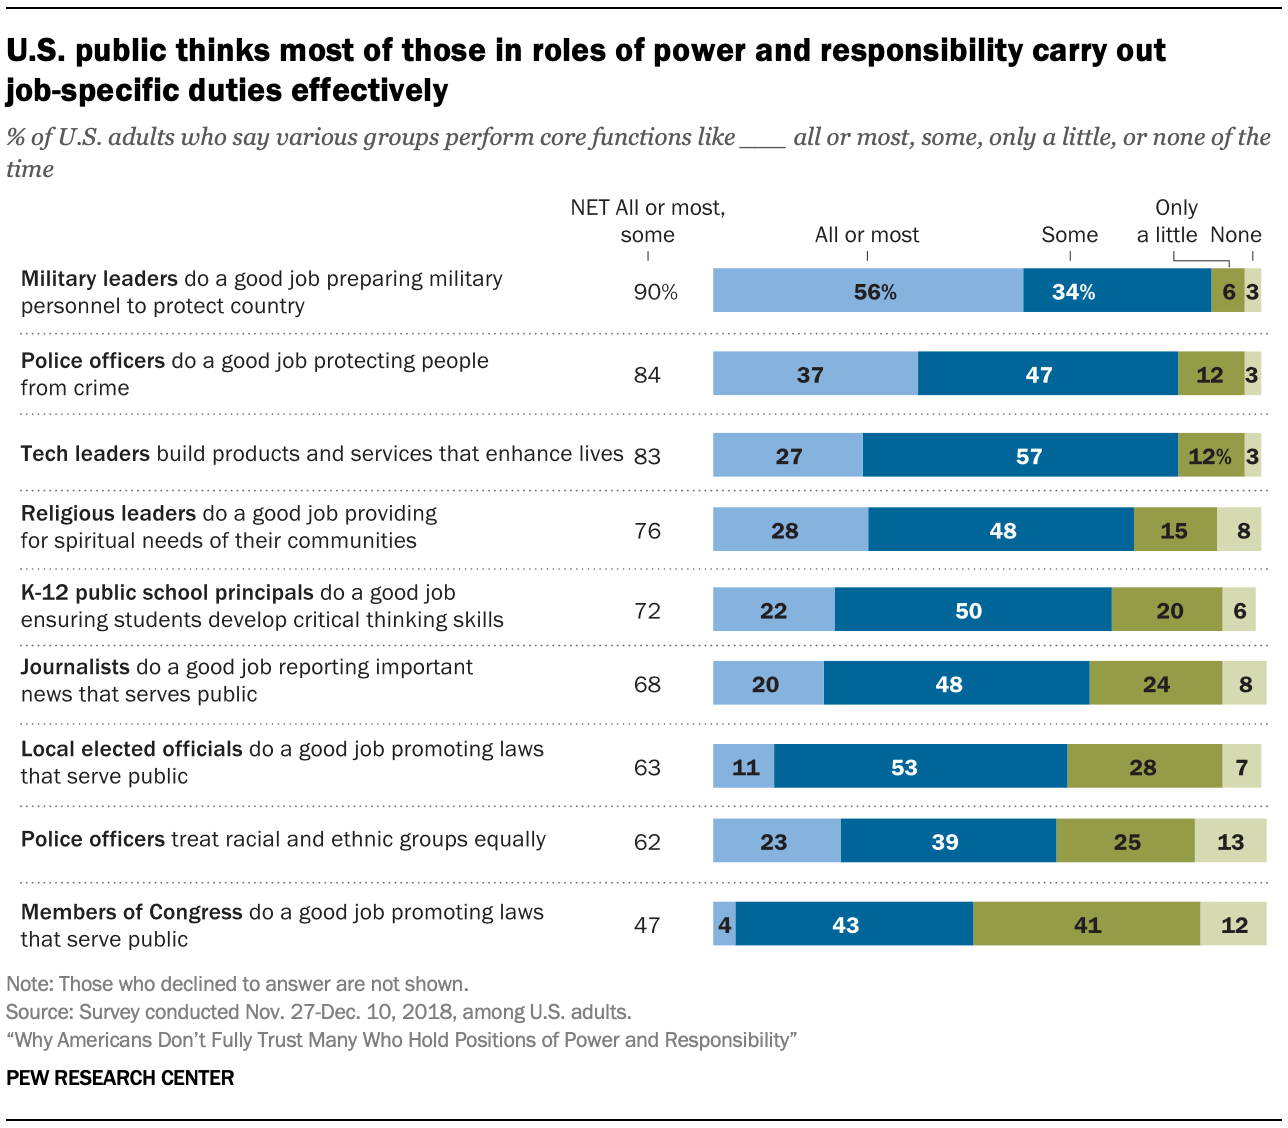 U.S. public thinks most of those in roles of power and responsibility carry out job-specific duties effectively